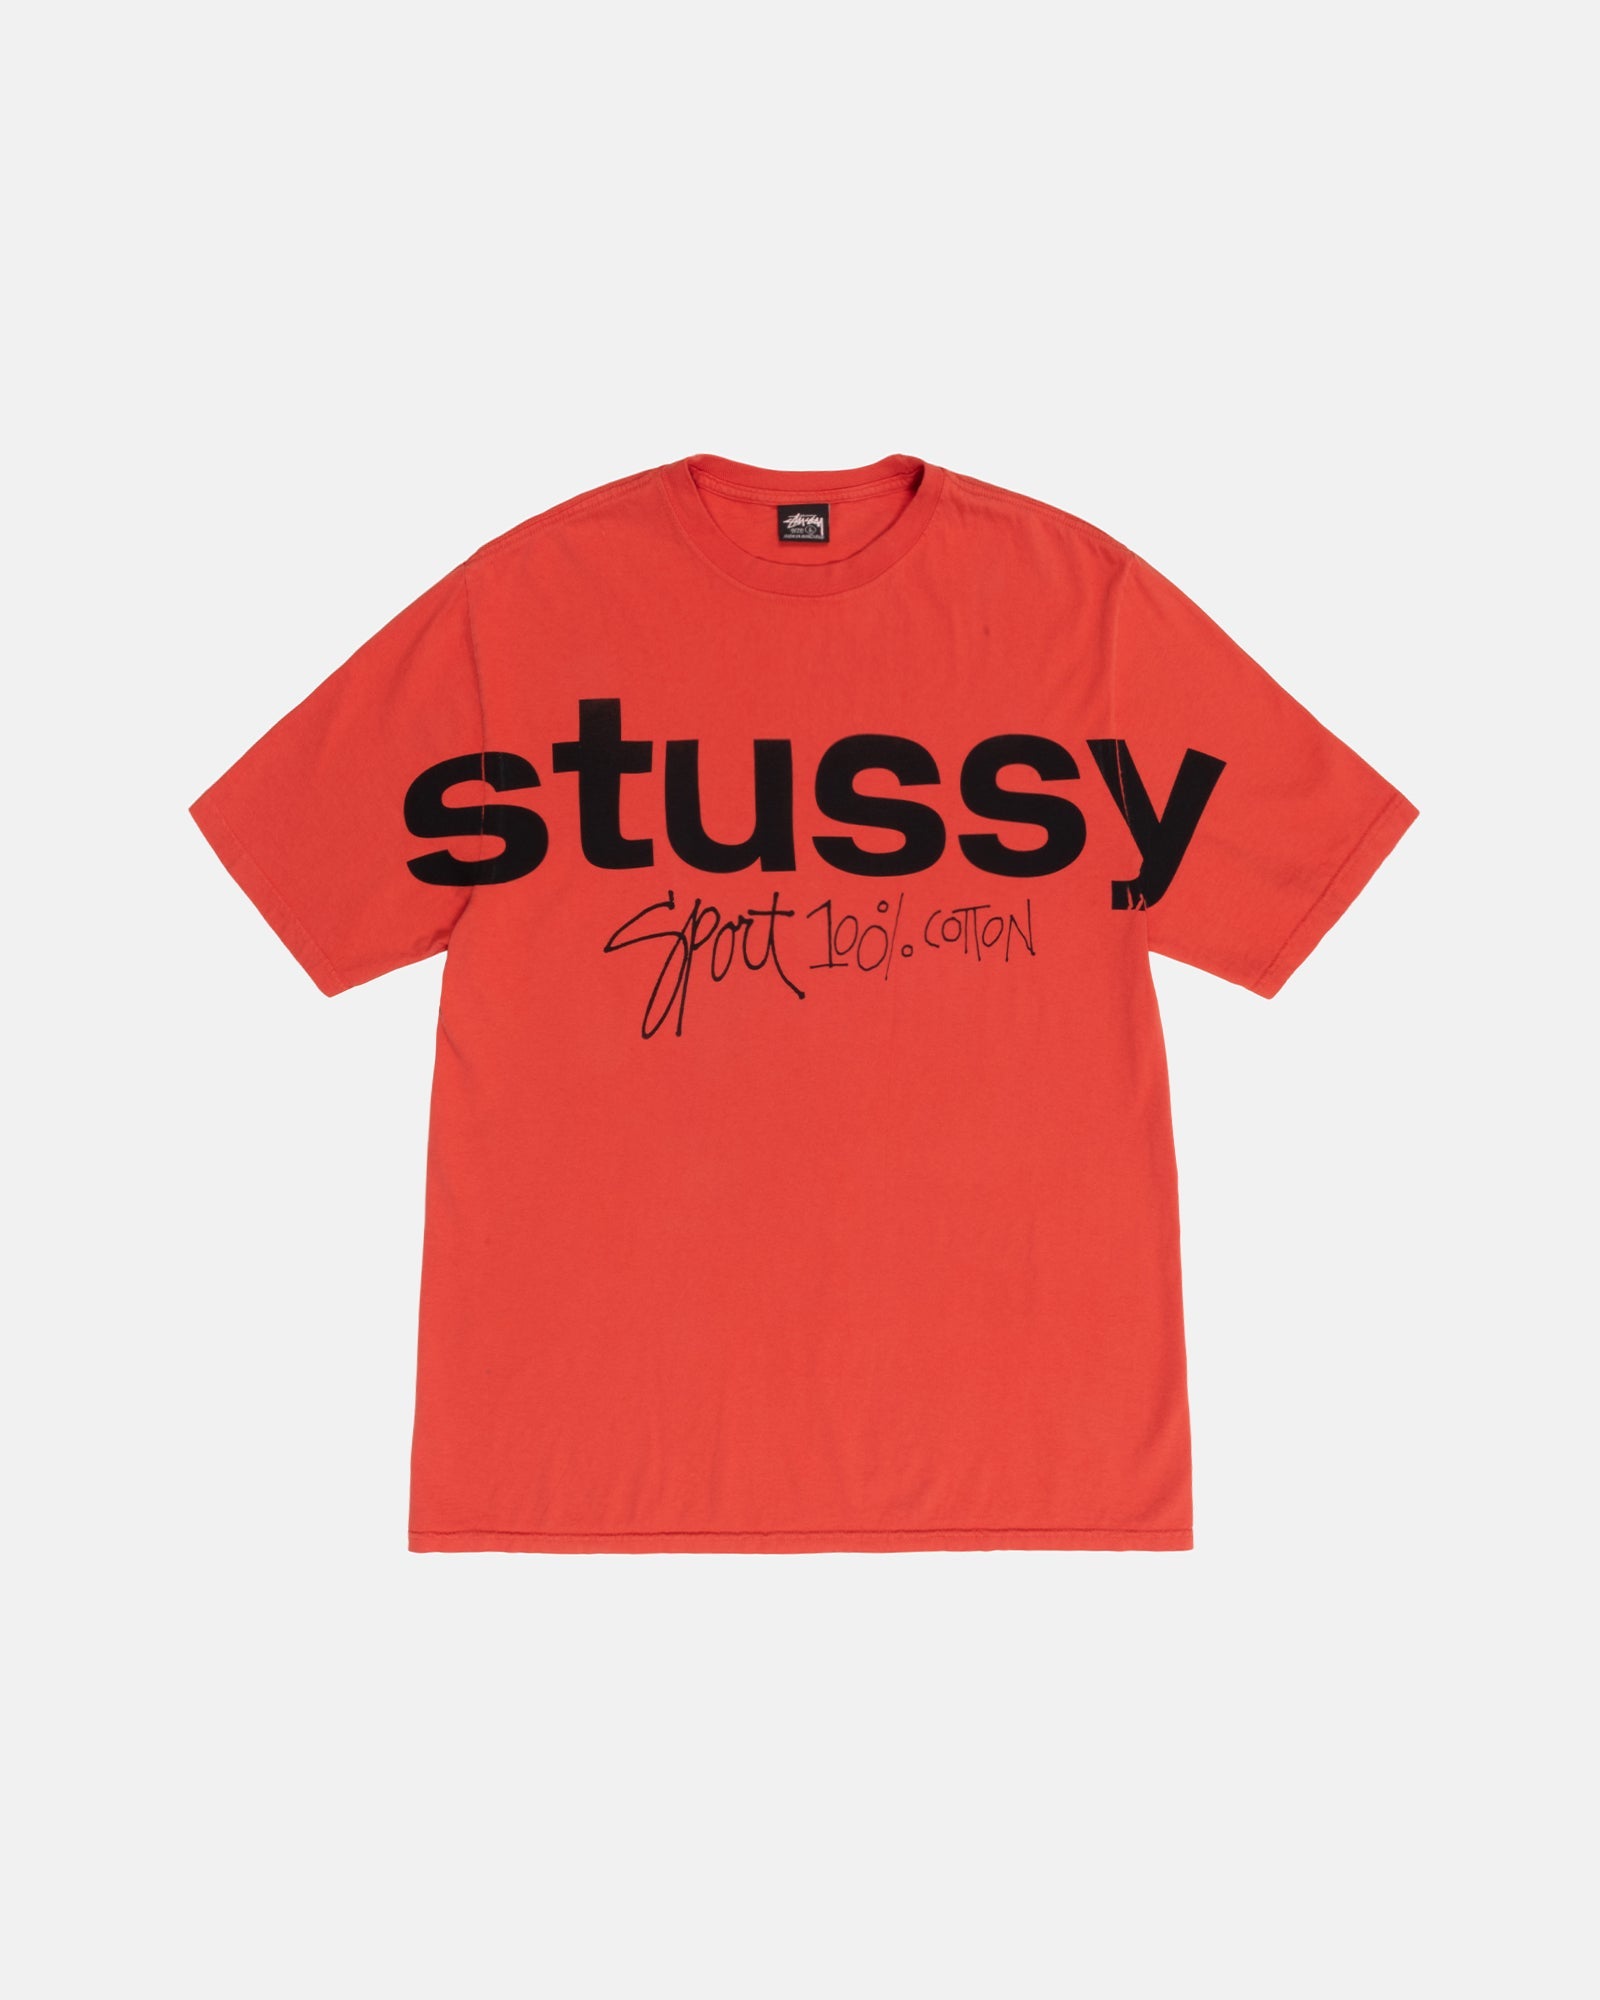 SPORT 100% PIGMENT DYED TEE